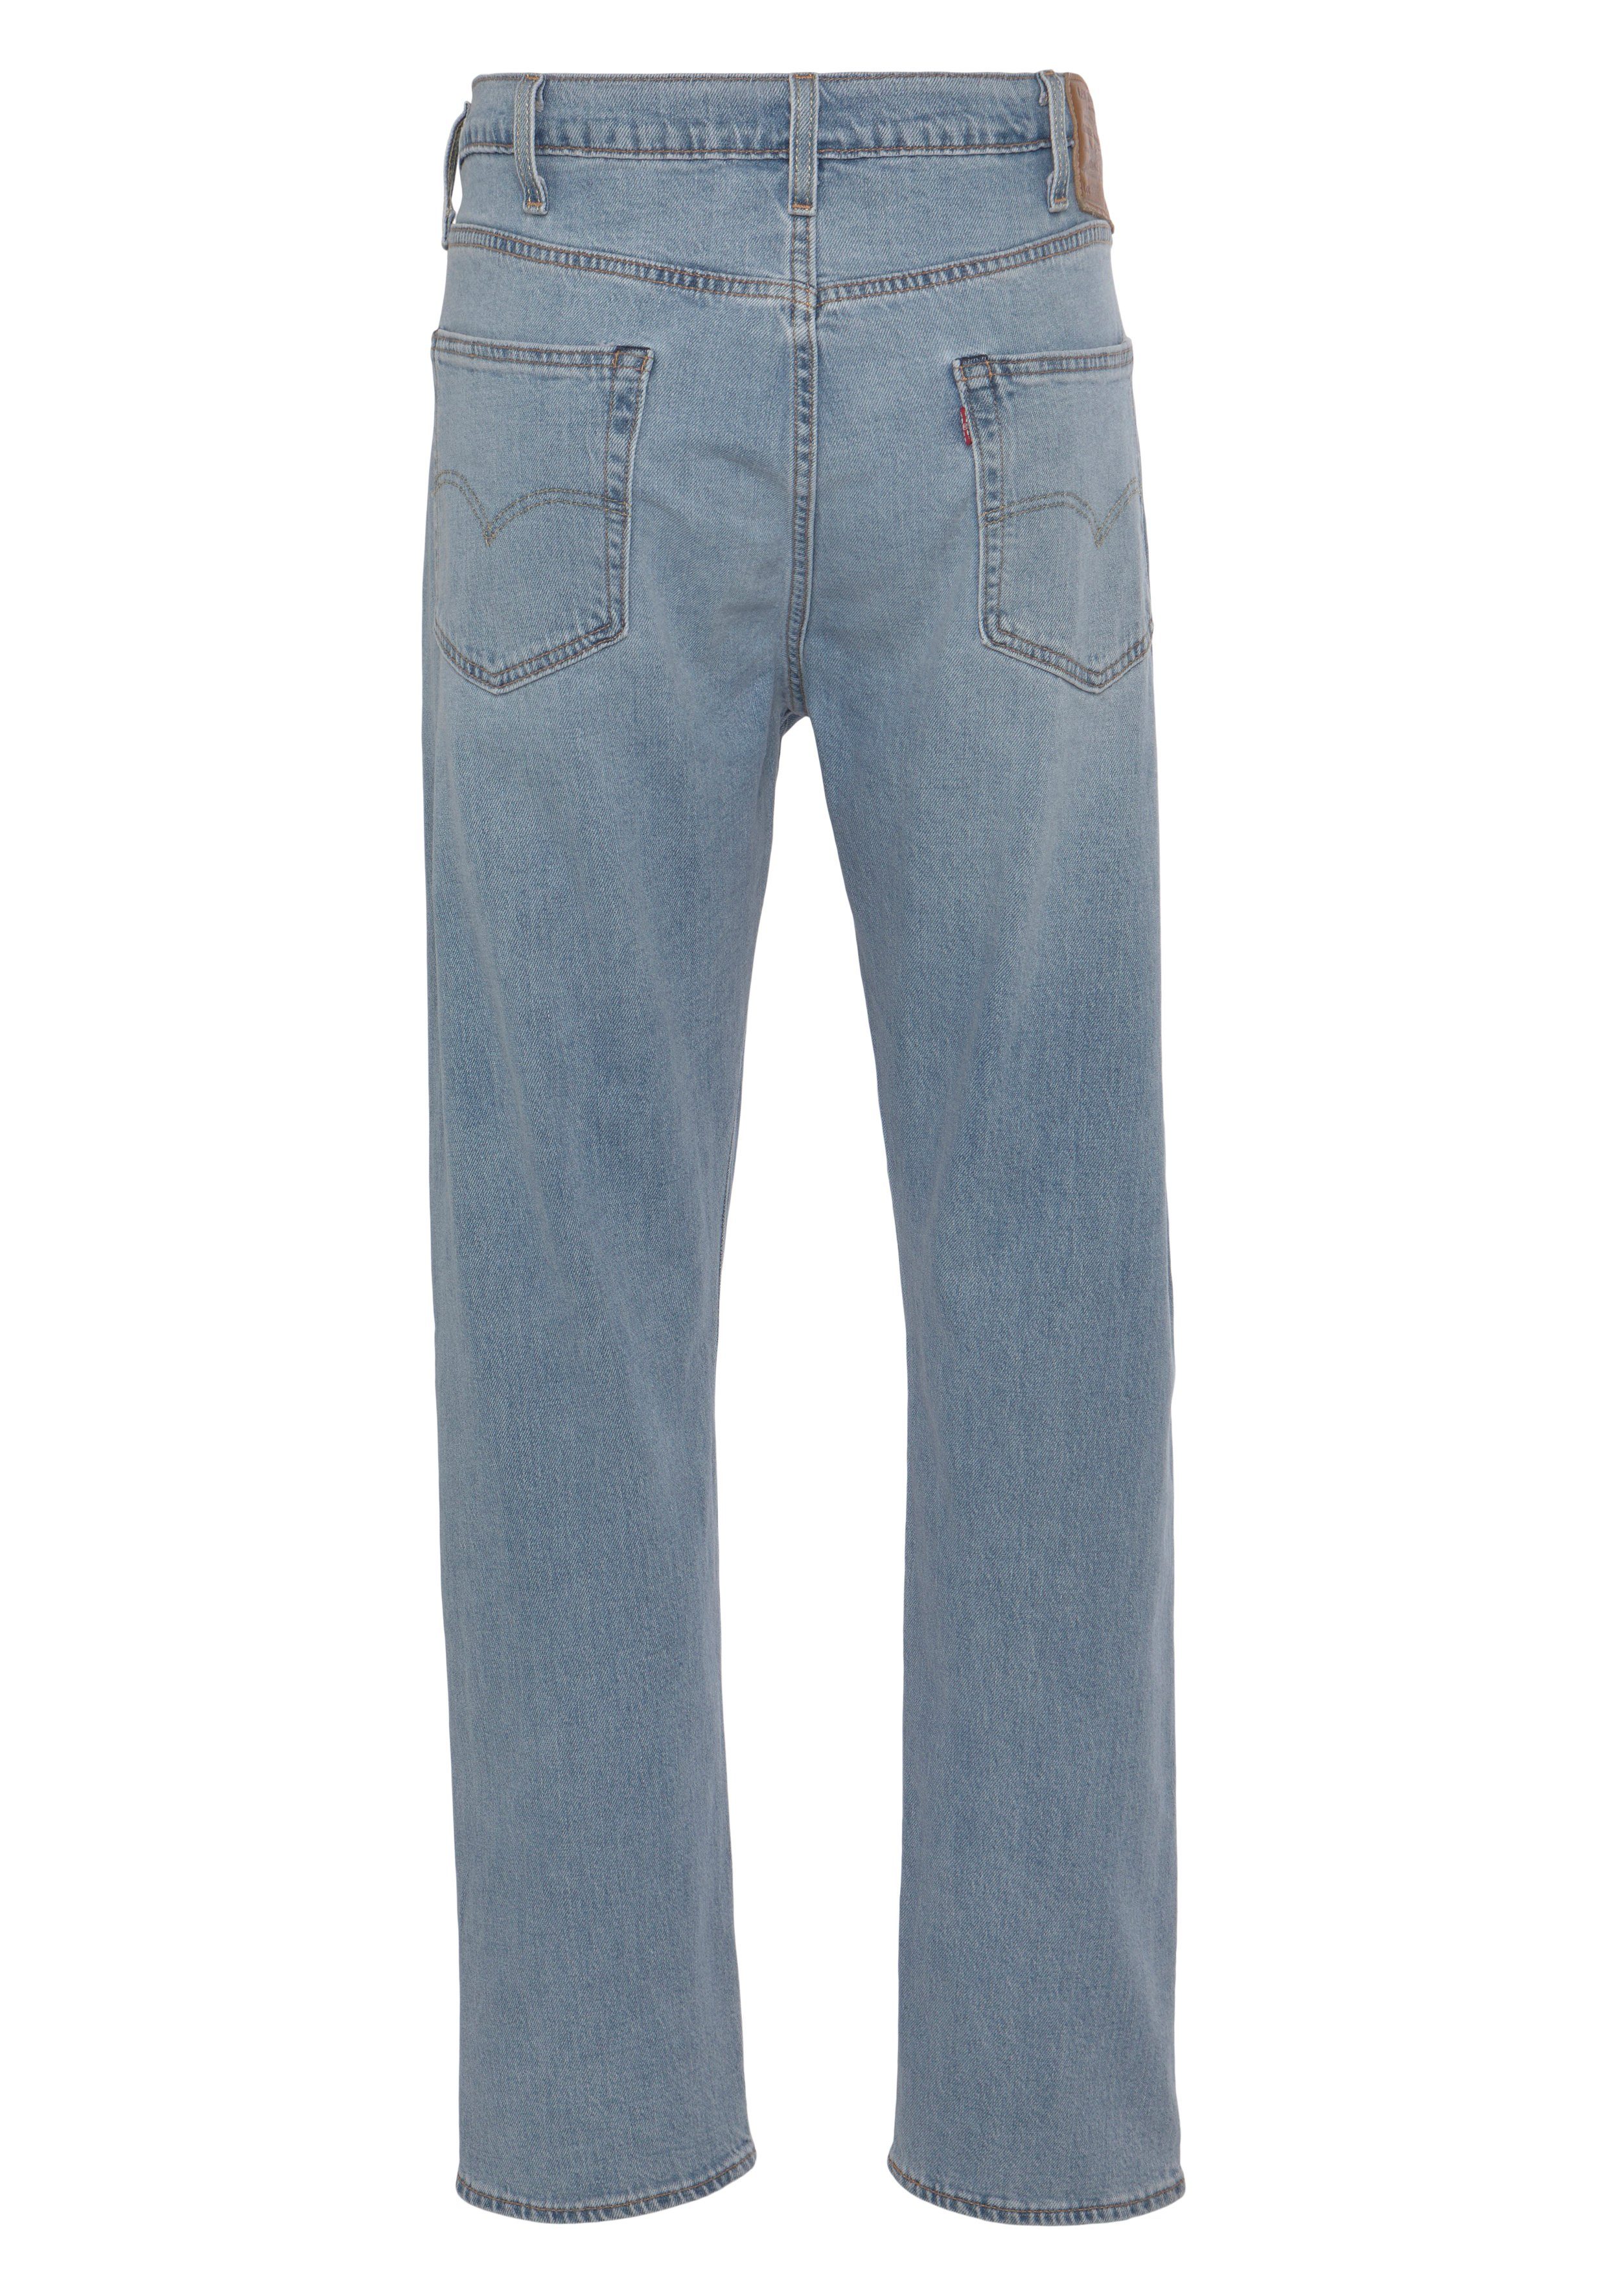 Waschung in OFF Levi's® CALL IT 512 authentischer Tapered-fit-Jeans Plus